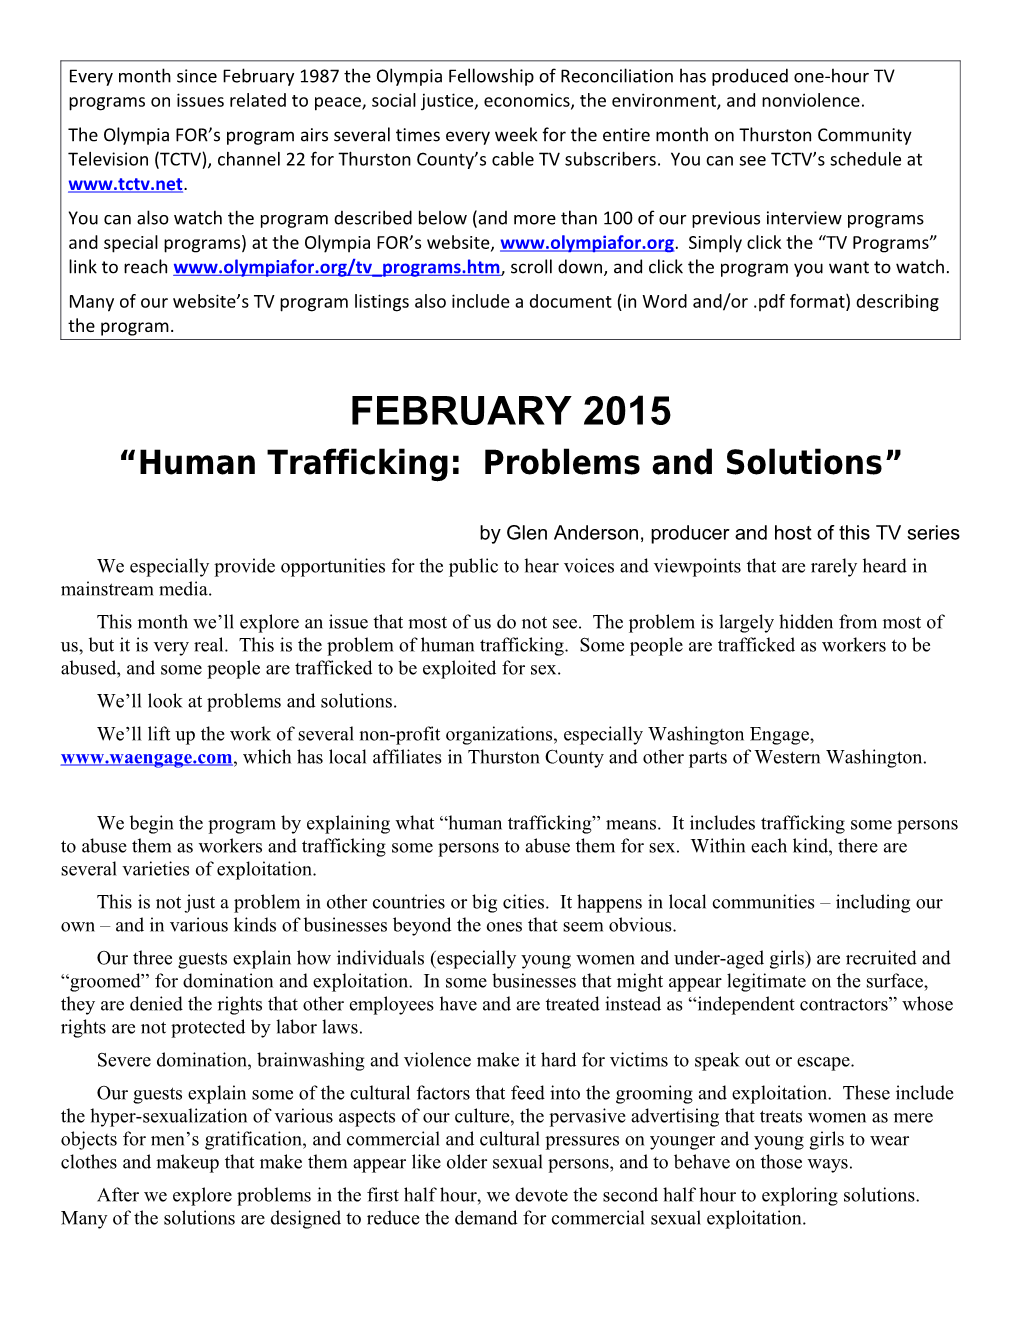 Human Trafficking: Problems and Solutions